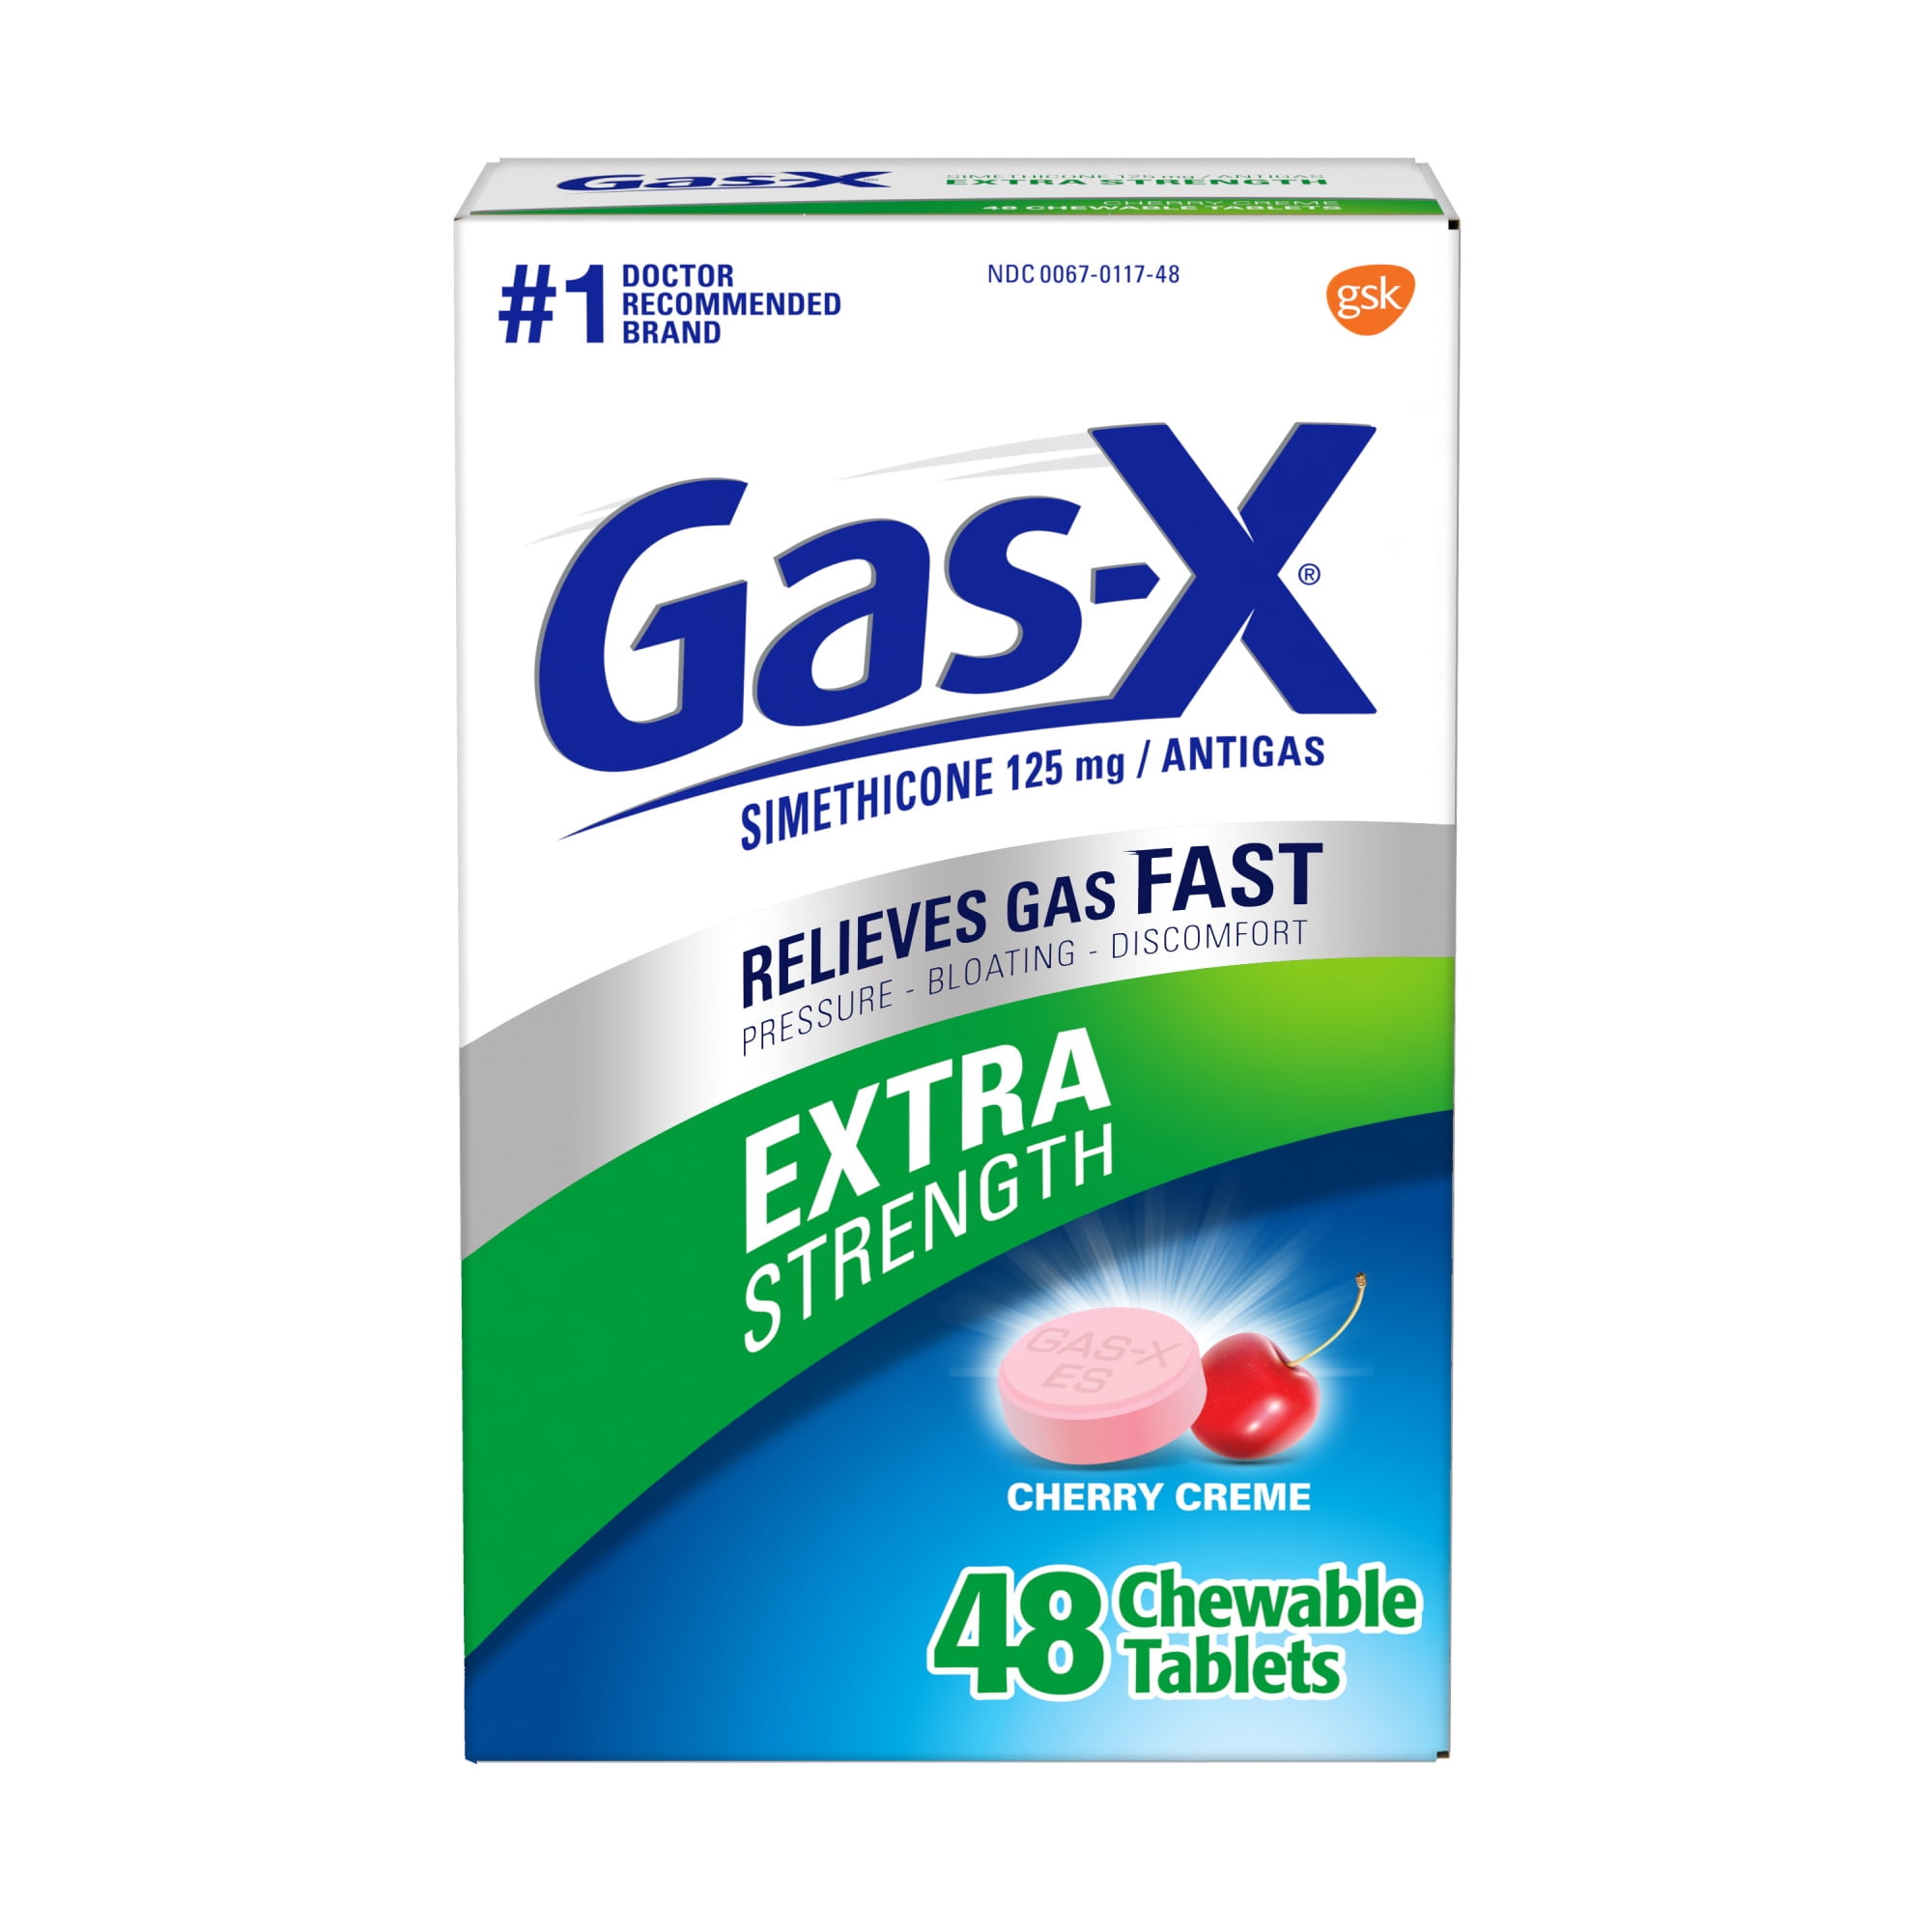 Gas-X Extra Strength Gas Relief Simethicone Chewable Tablets, Cherry Creme, 48 Count